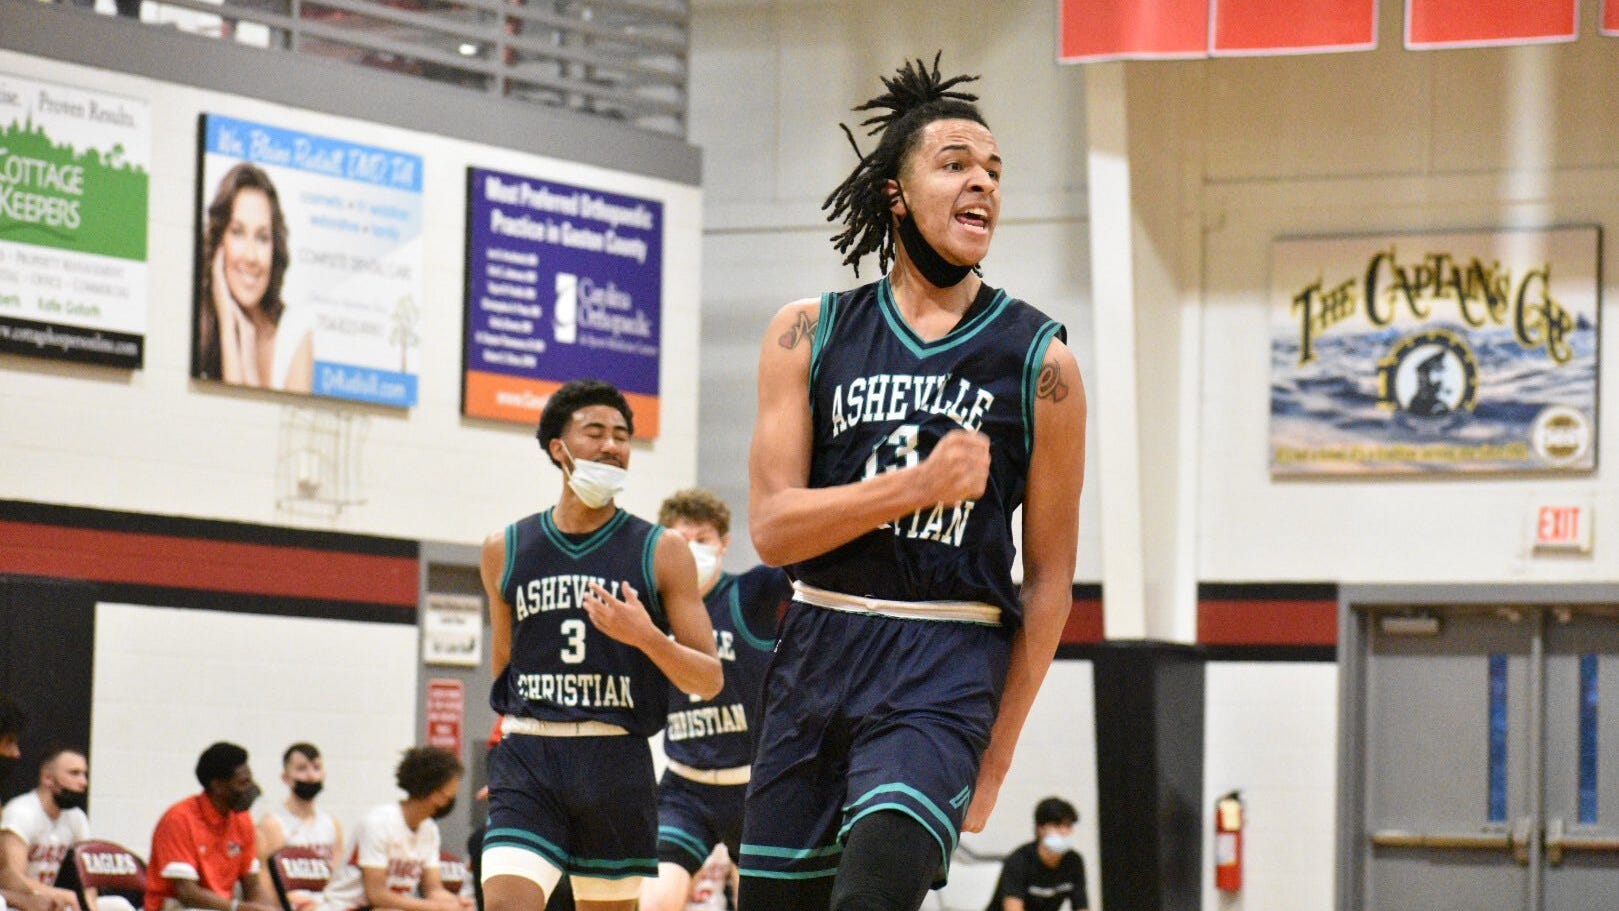 Four-star 2022 UNC target De'Ante Green ends his junior year with an improbable state championship